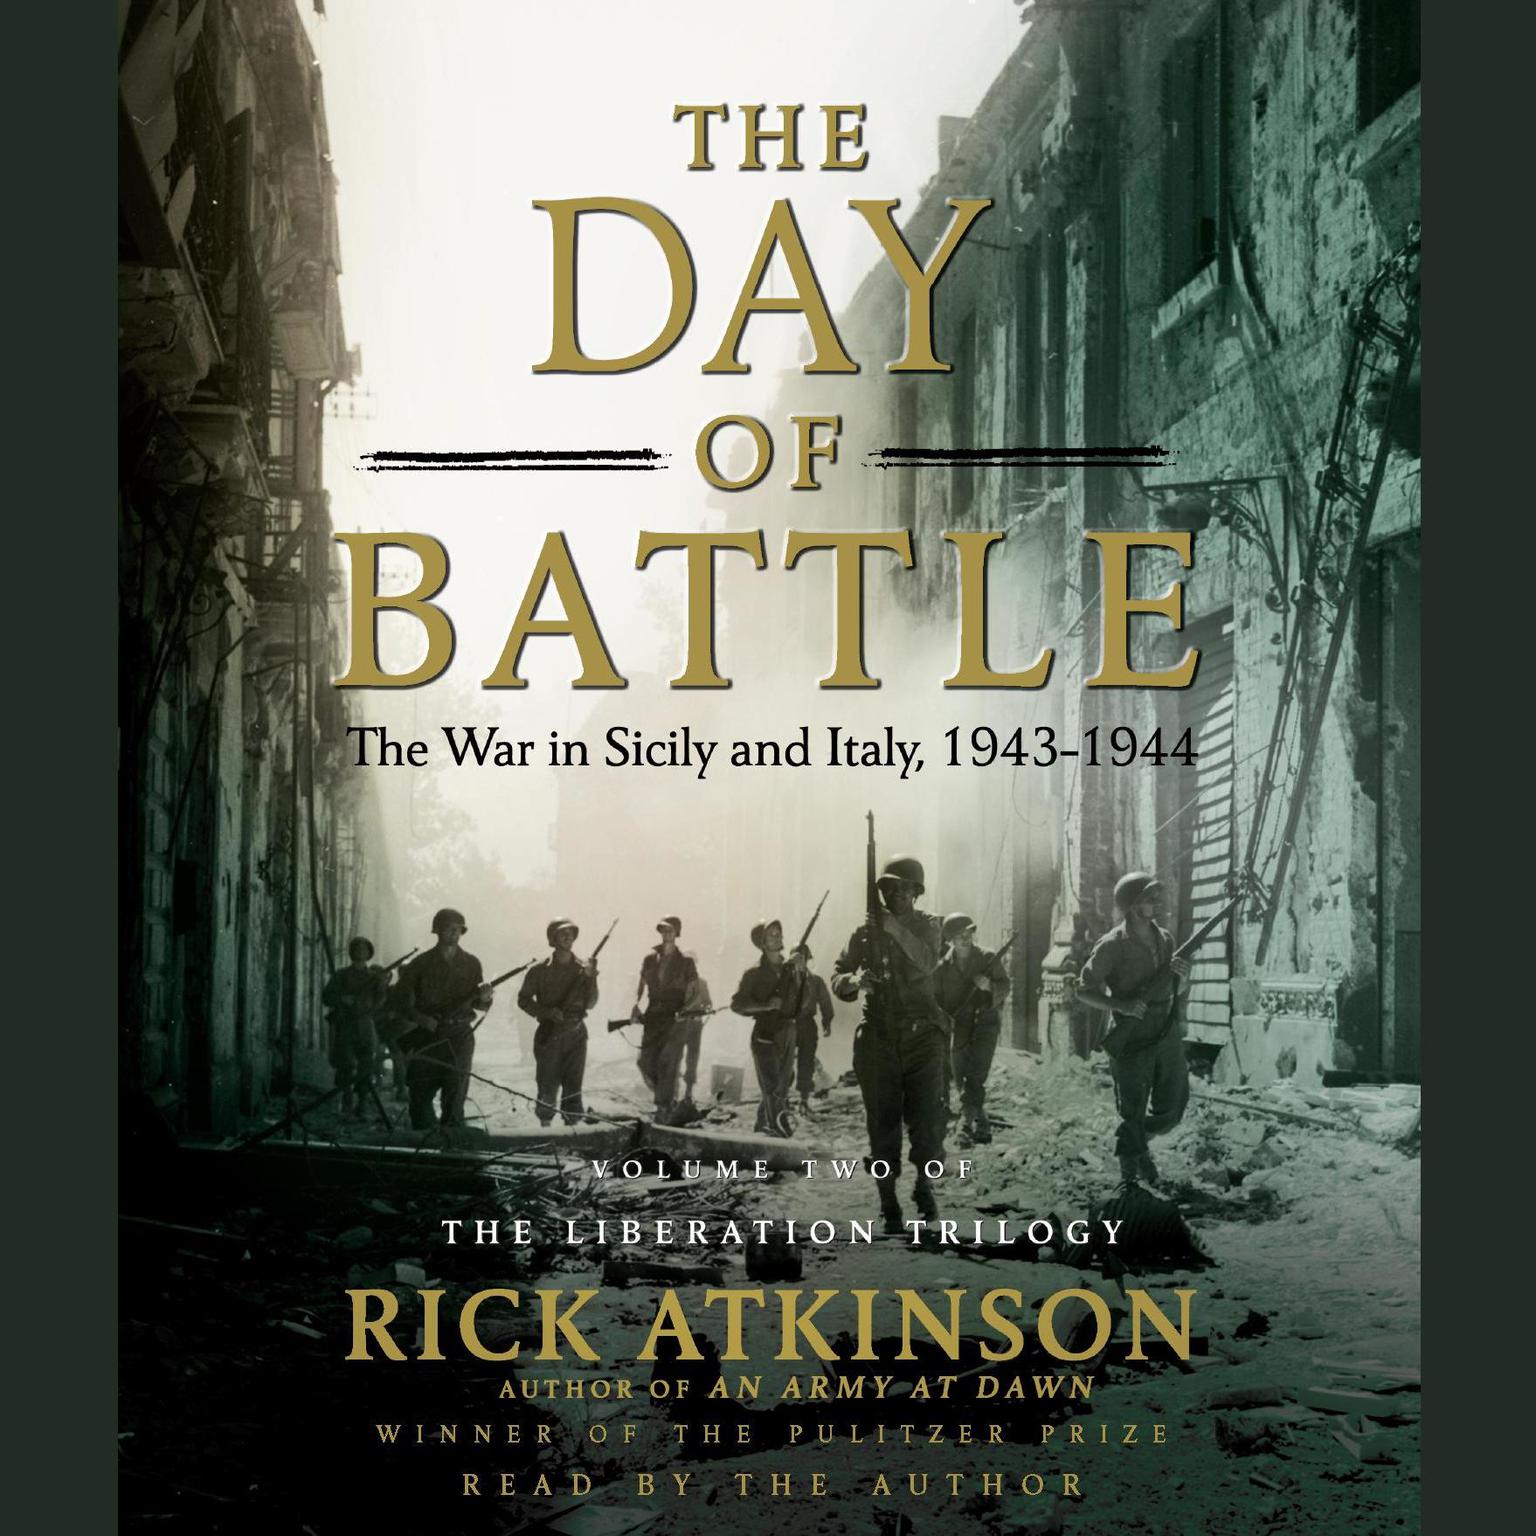 The Day of Battle (Abridged): The War in Sicily and Italy, 1943-1944 Audiobook, by Rick Atkinson